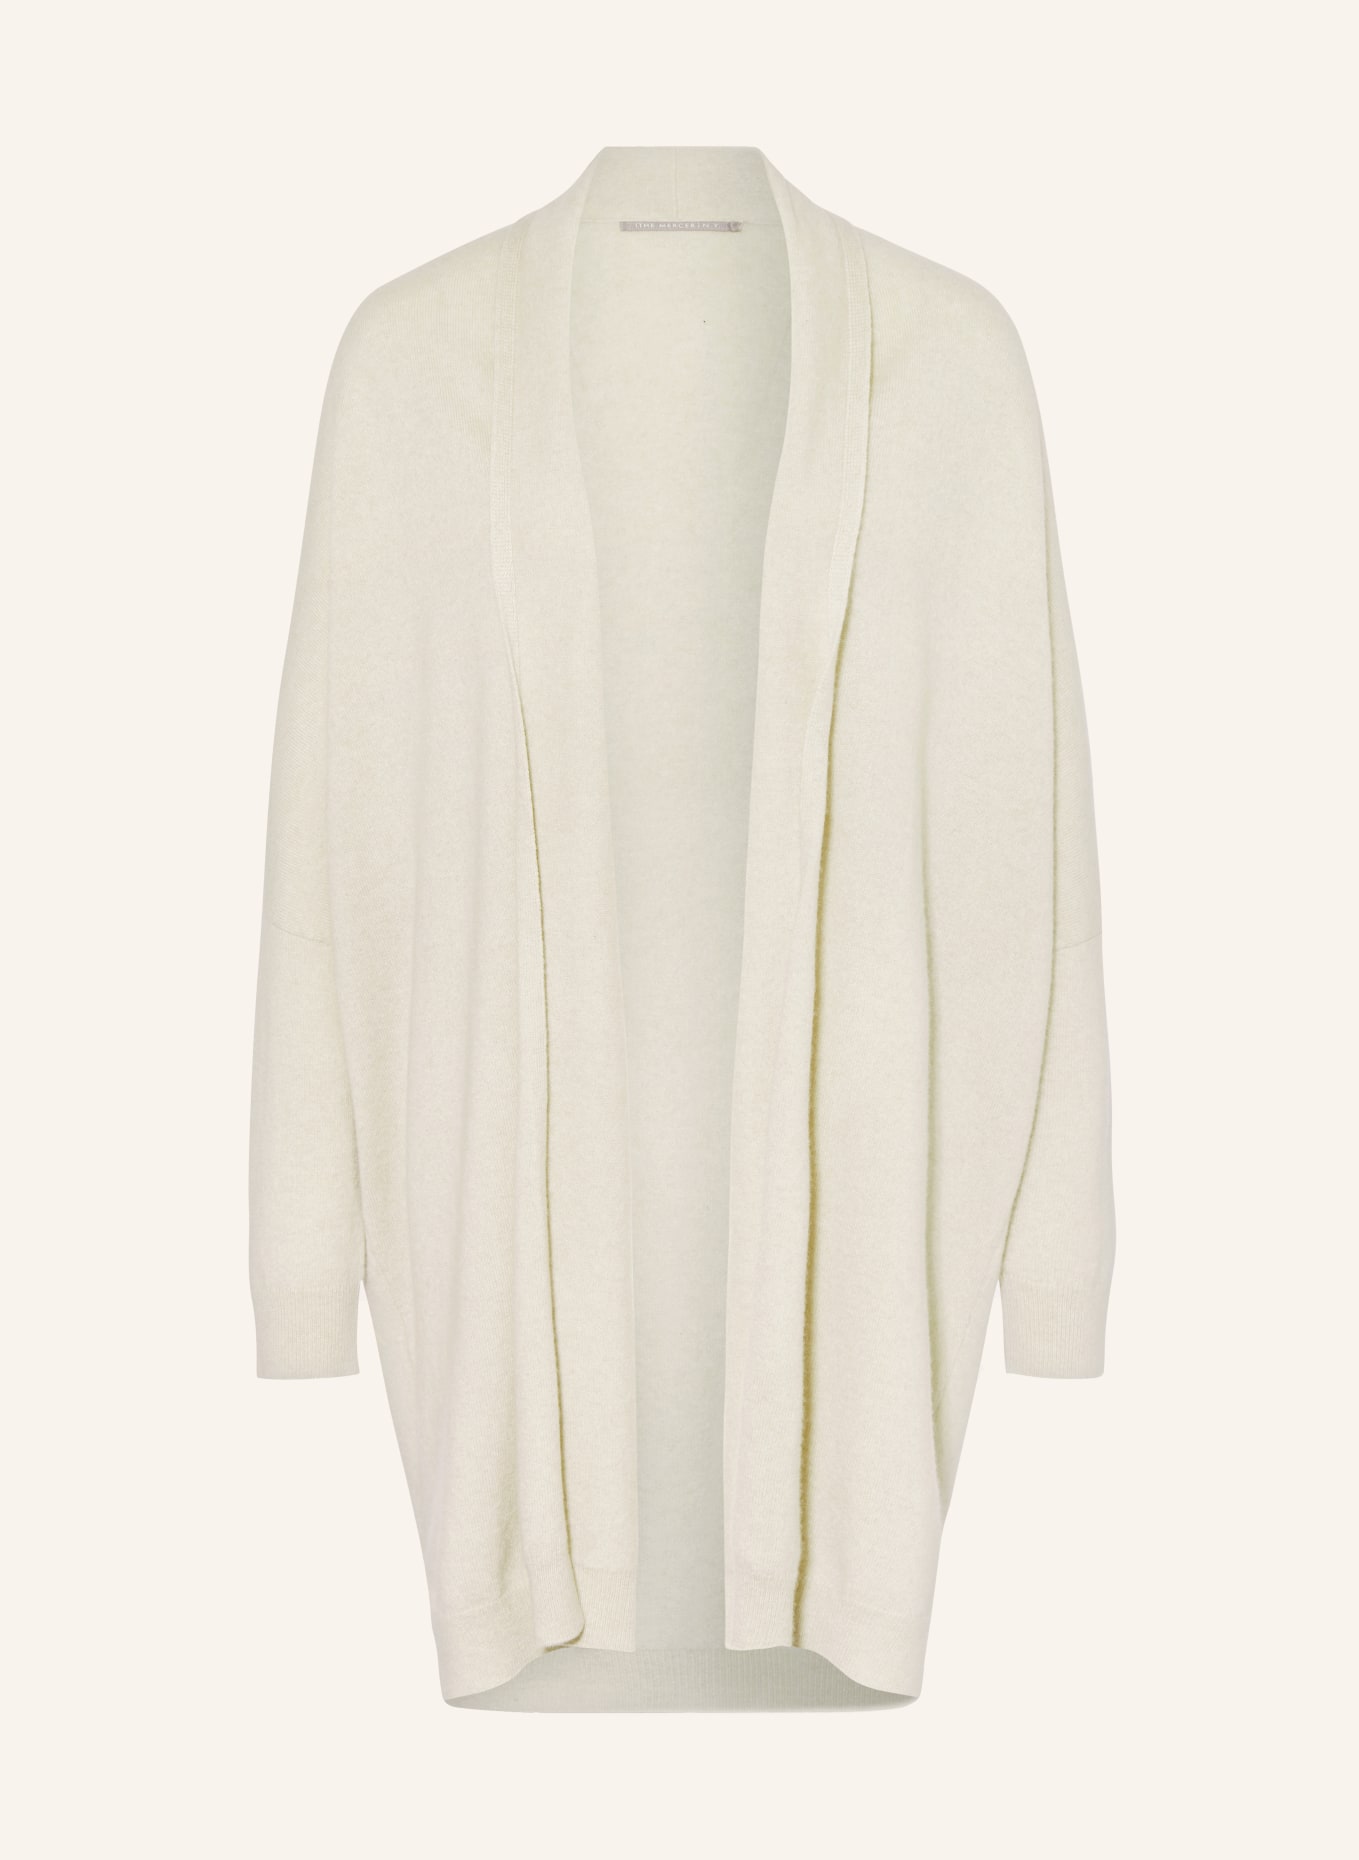 (THE MERCER) N.Y. Knit cardigan made of cashmere, Color: LIGHT BROWN (Image 1)